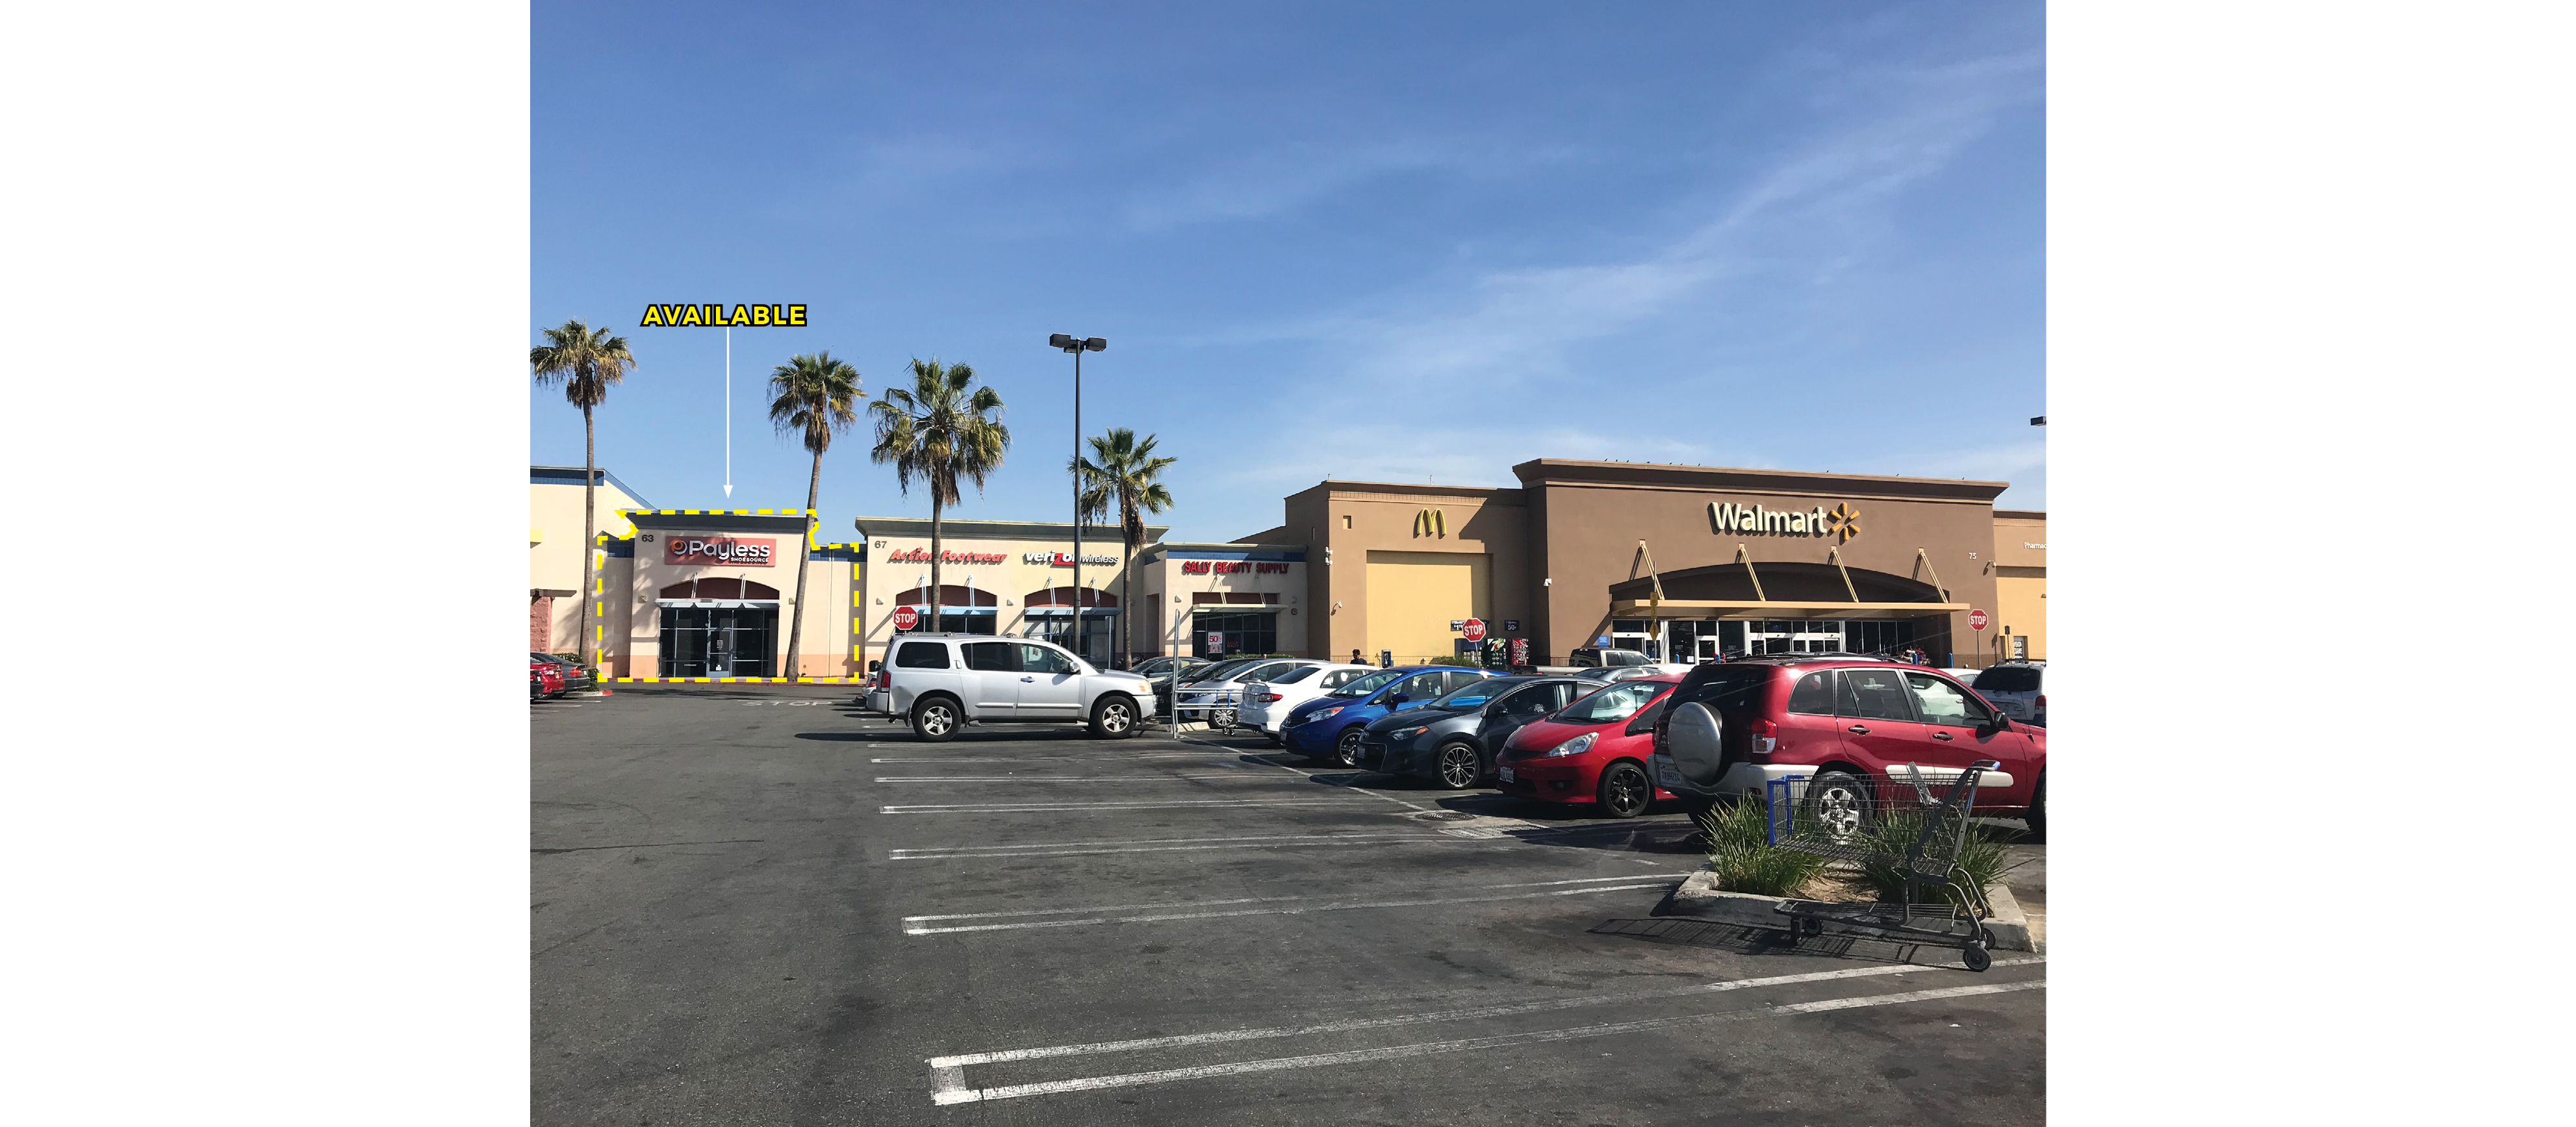 SOUTHBAY MARKETPLACE | Retail Insite